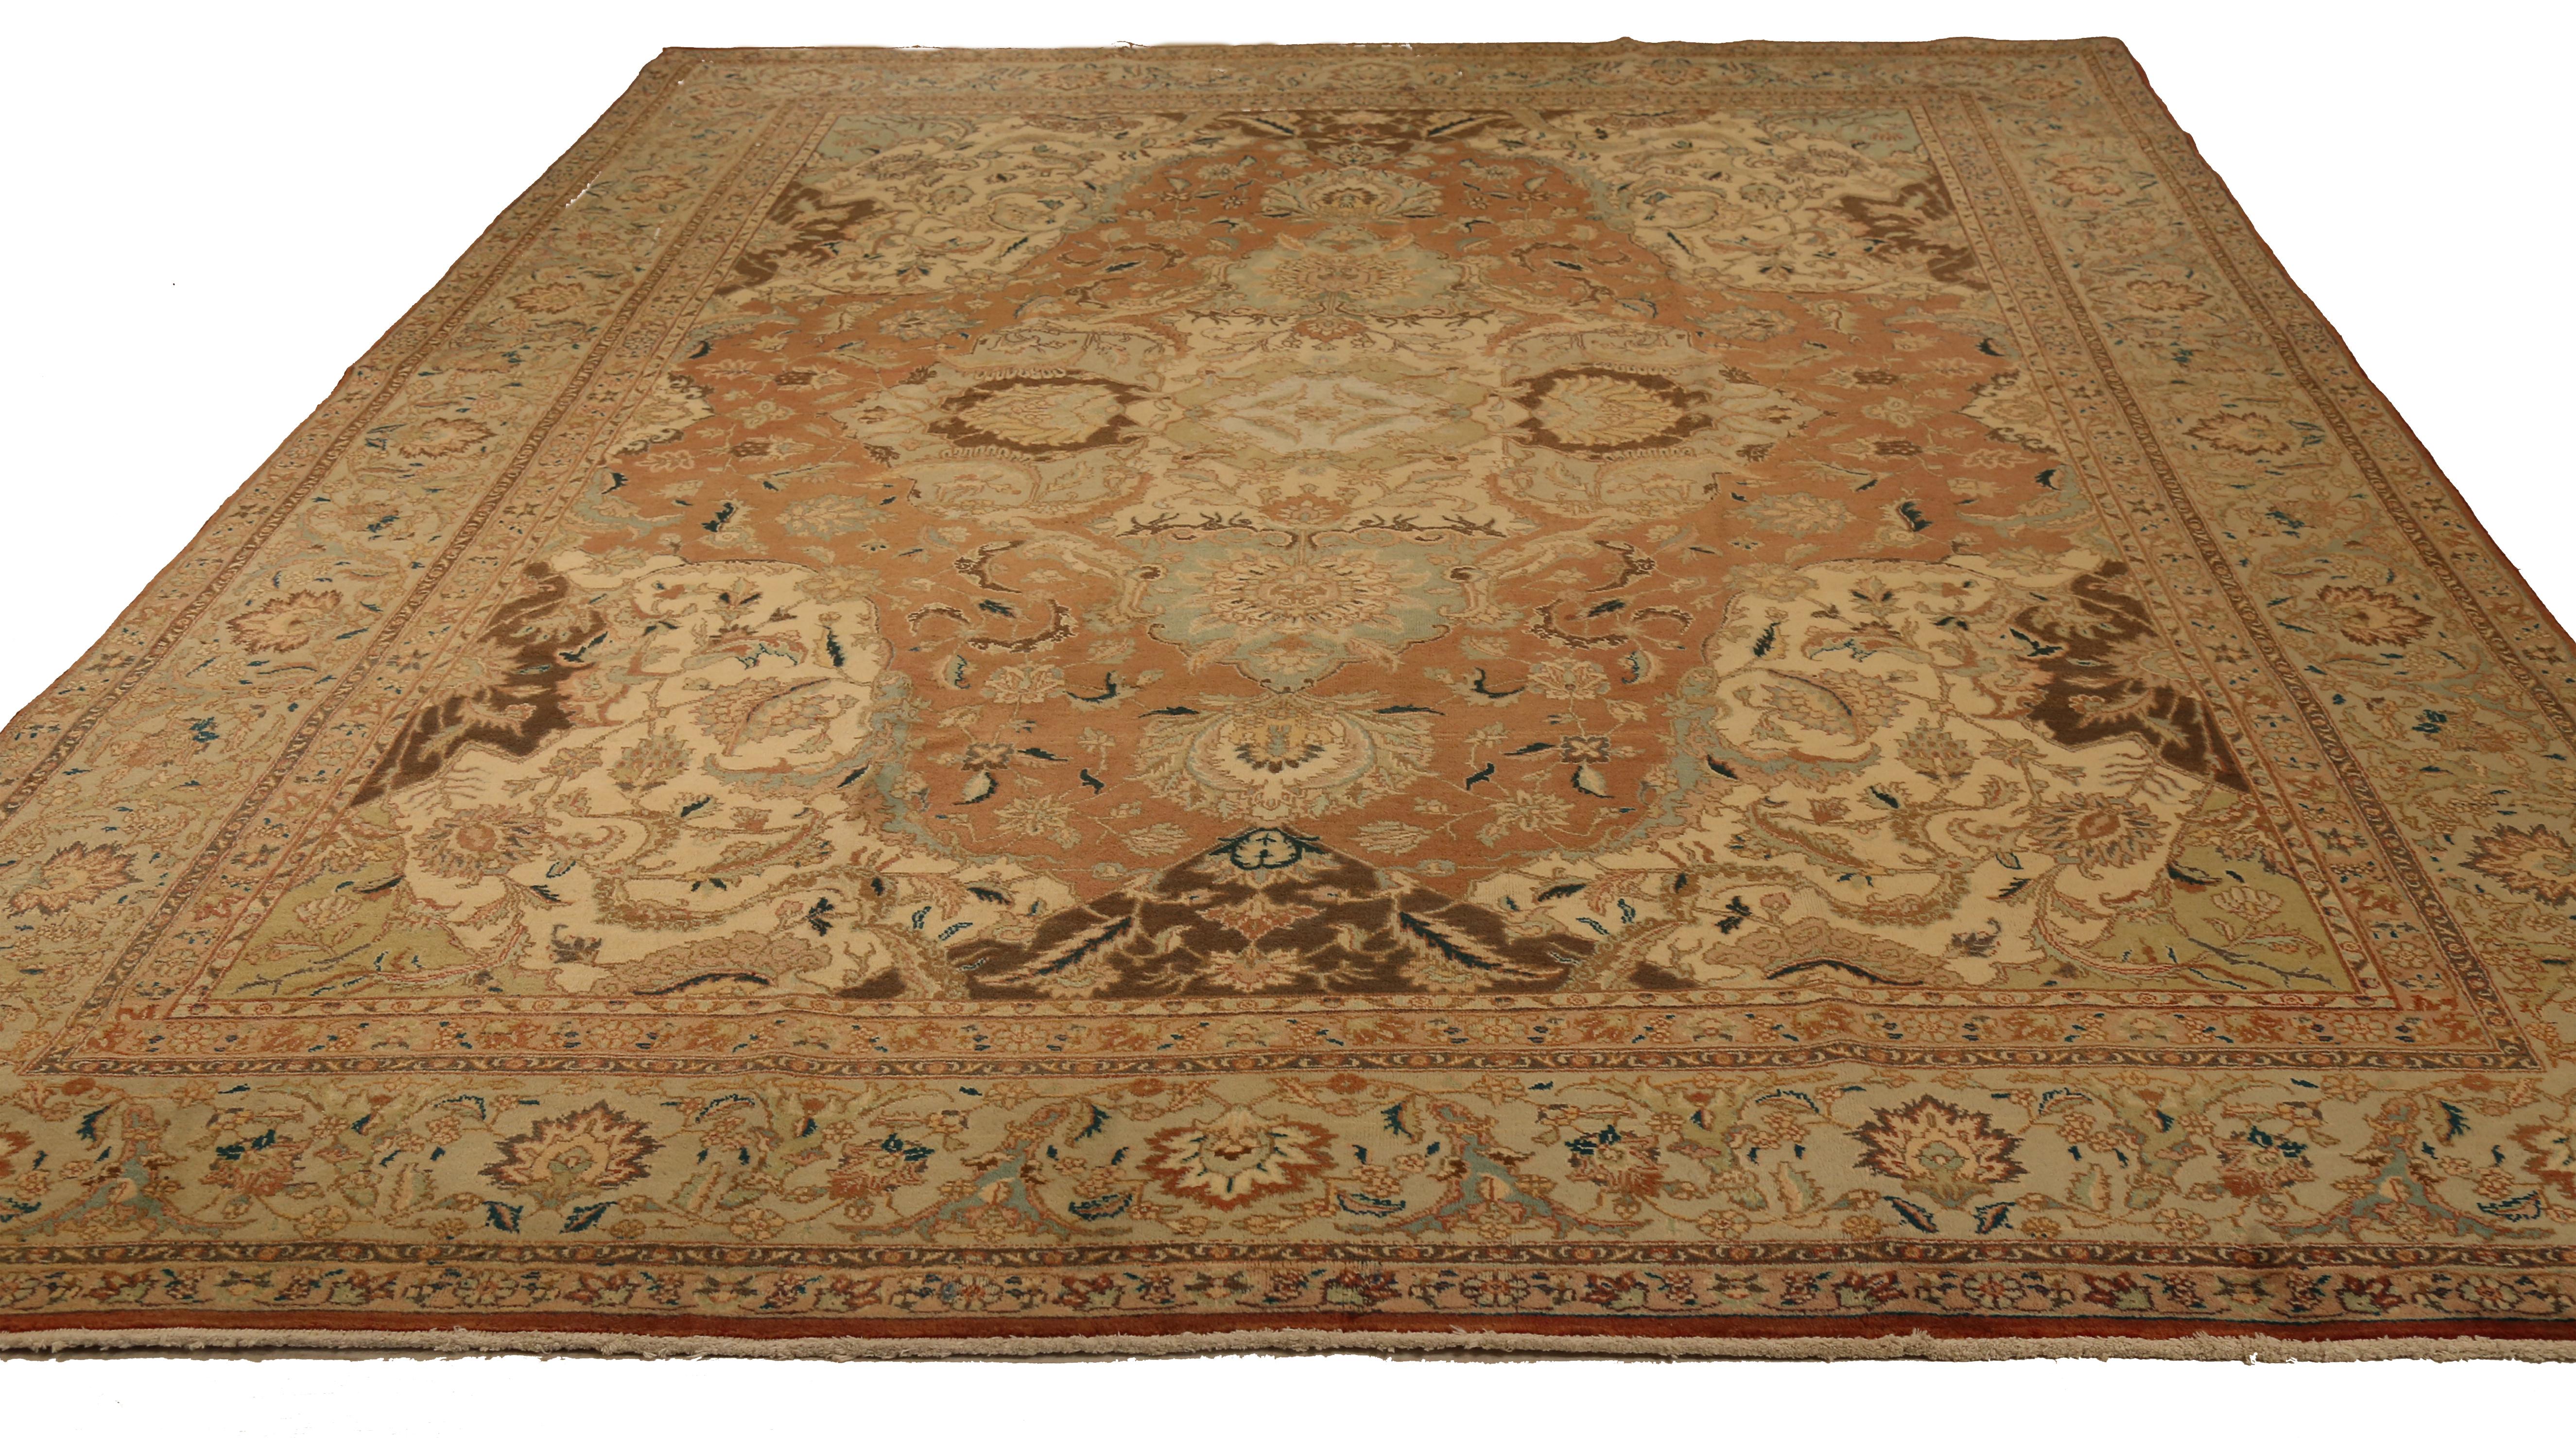 Mid-20th century hand-woven Persian area rug made from fine wool and all-natural vegetable dyes that are safe for people and pets. It features traditional Tabriz weaving depicting intricate botanical and animal patterns often in bold colors.